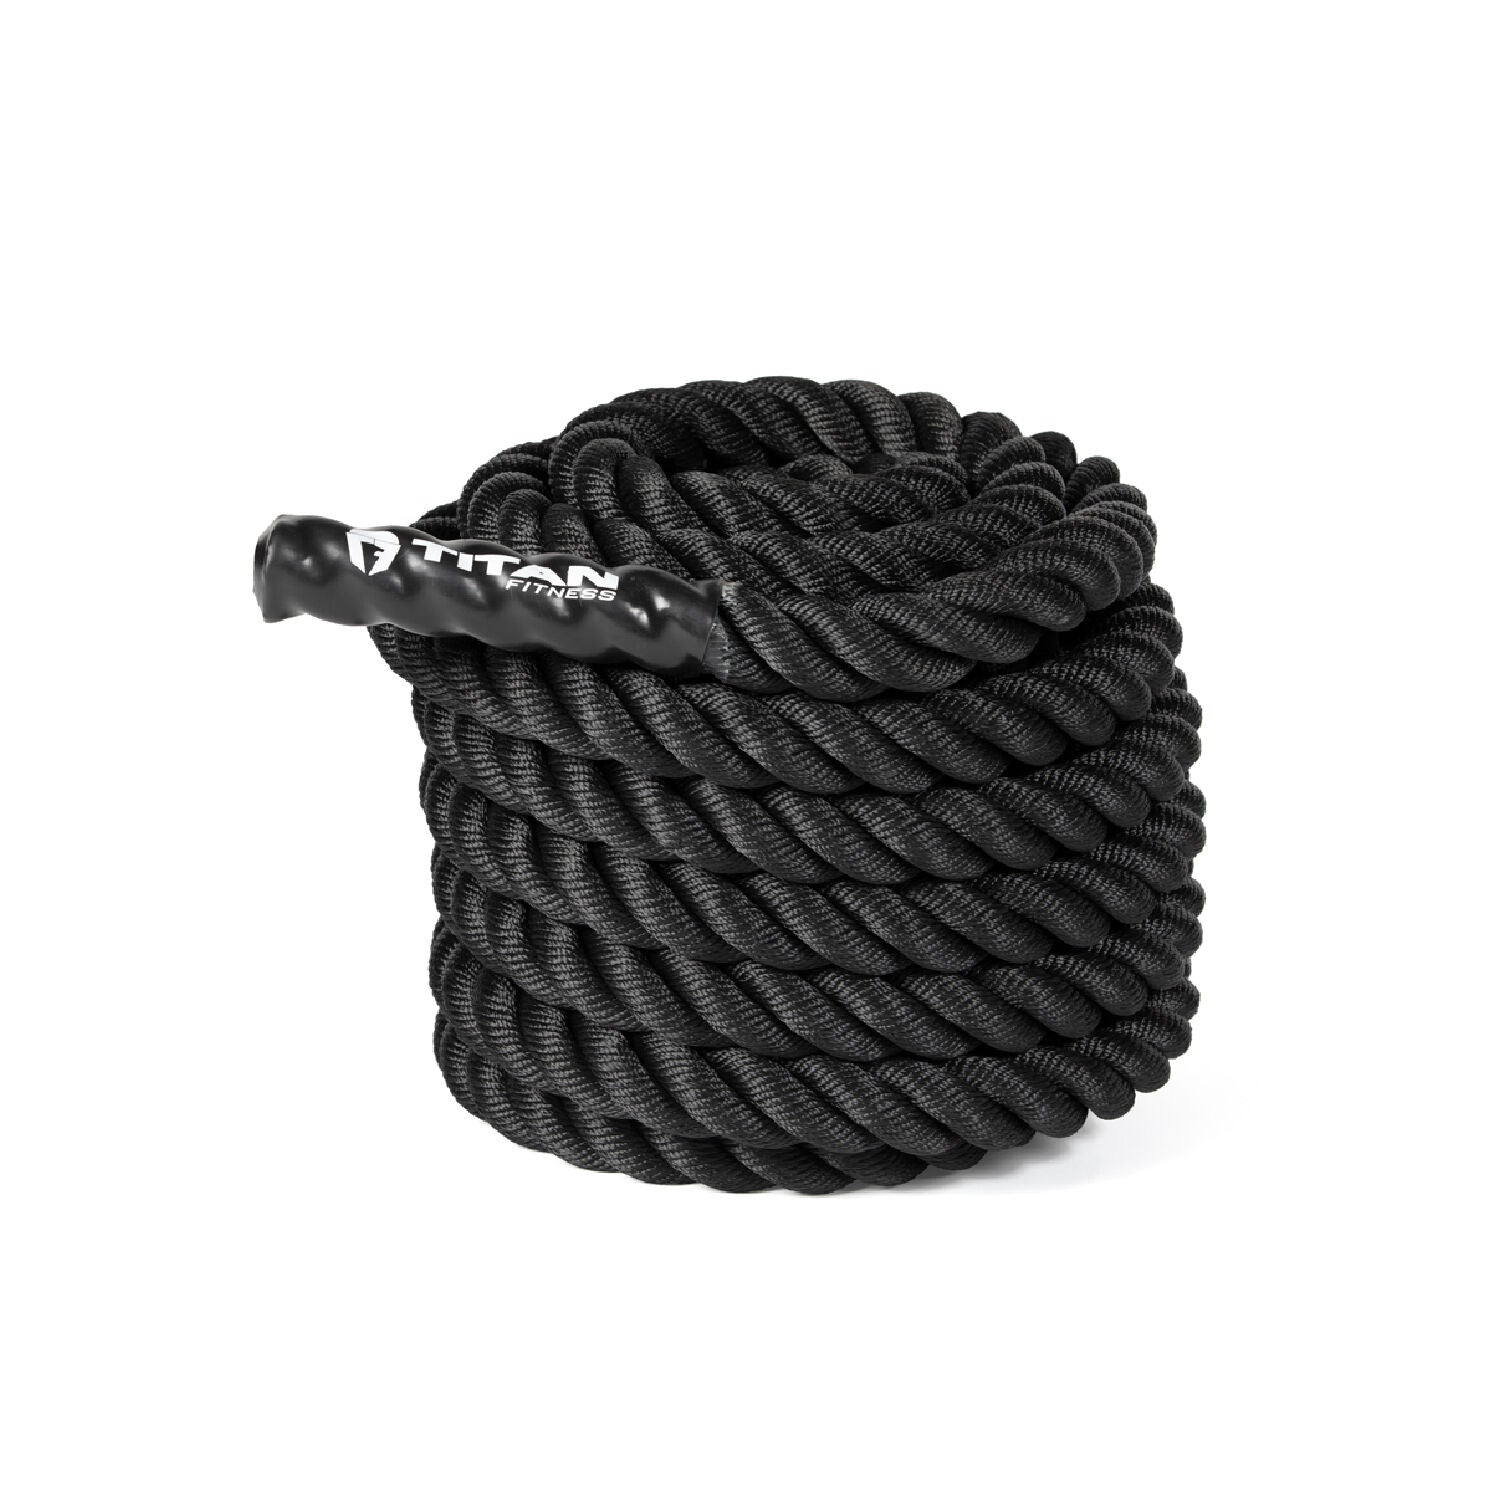 Scratch and Dent - 40' x 1.5" Battle Rope Black Poly Dacron - FINAL SALE